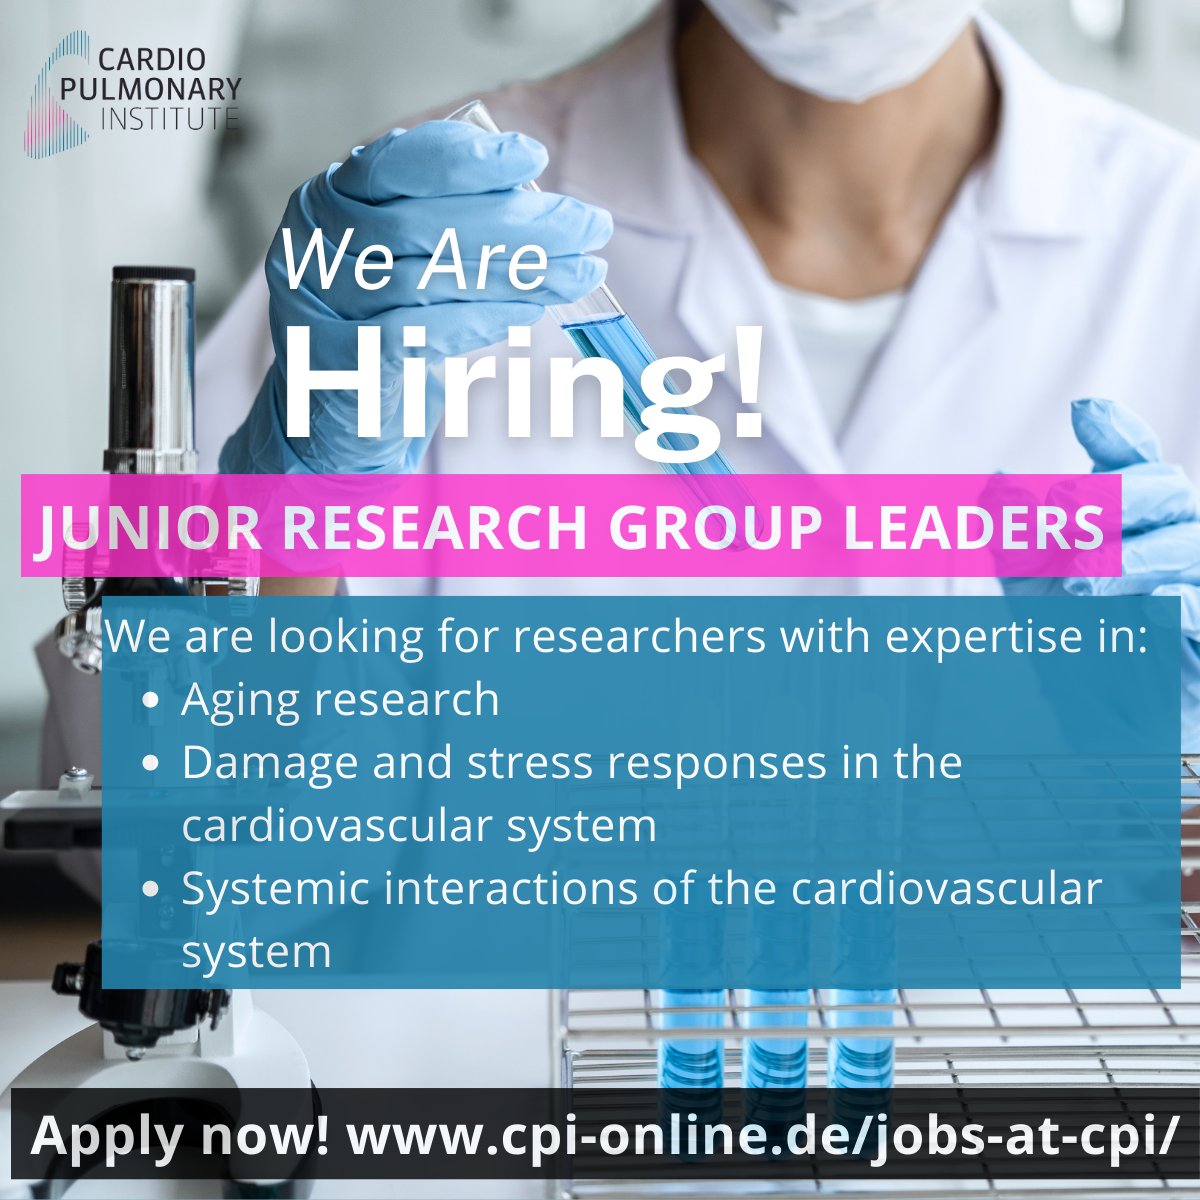 #WeAreHiring - The CPI is offering 3 Junior Research Group Leader positions in Frankfurt to investigate aging, damage & stress responses in the cardiovascular system, and systemic interactions of the cardiovascular system. Apply: cpi-online.de/jobs-at-cpi/ @IVS_FFM @StefanieDimmel1